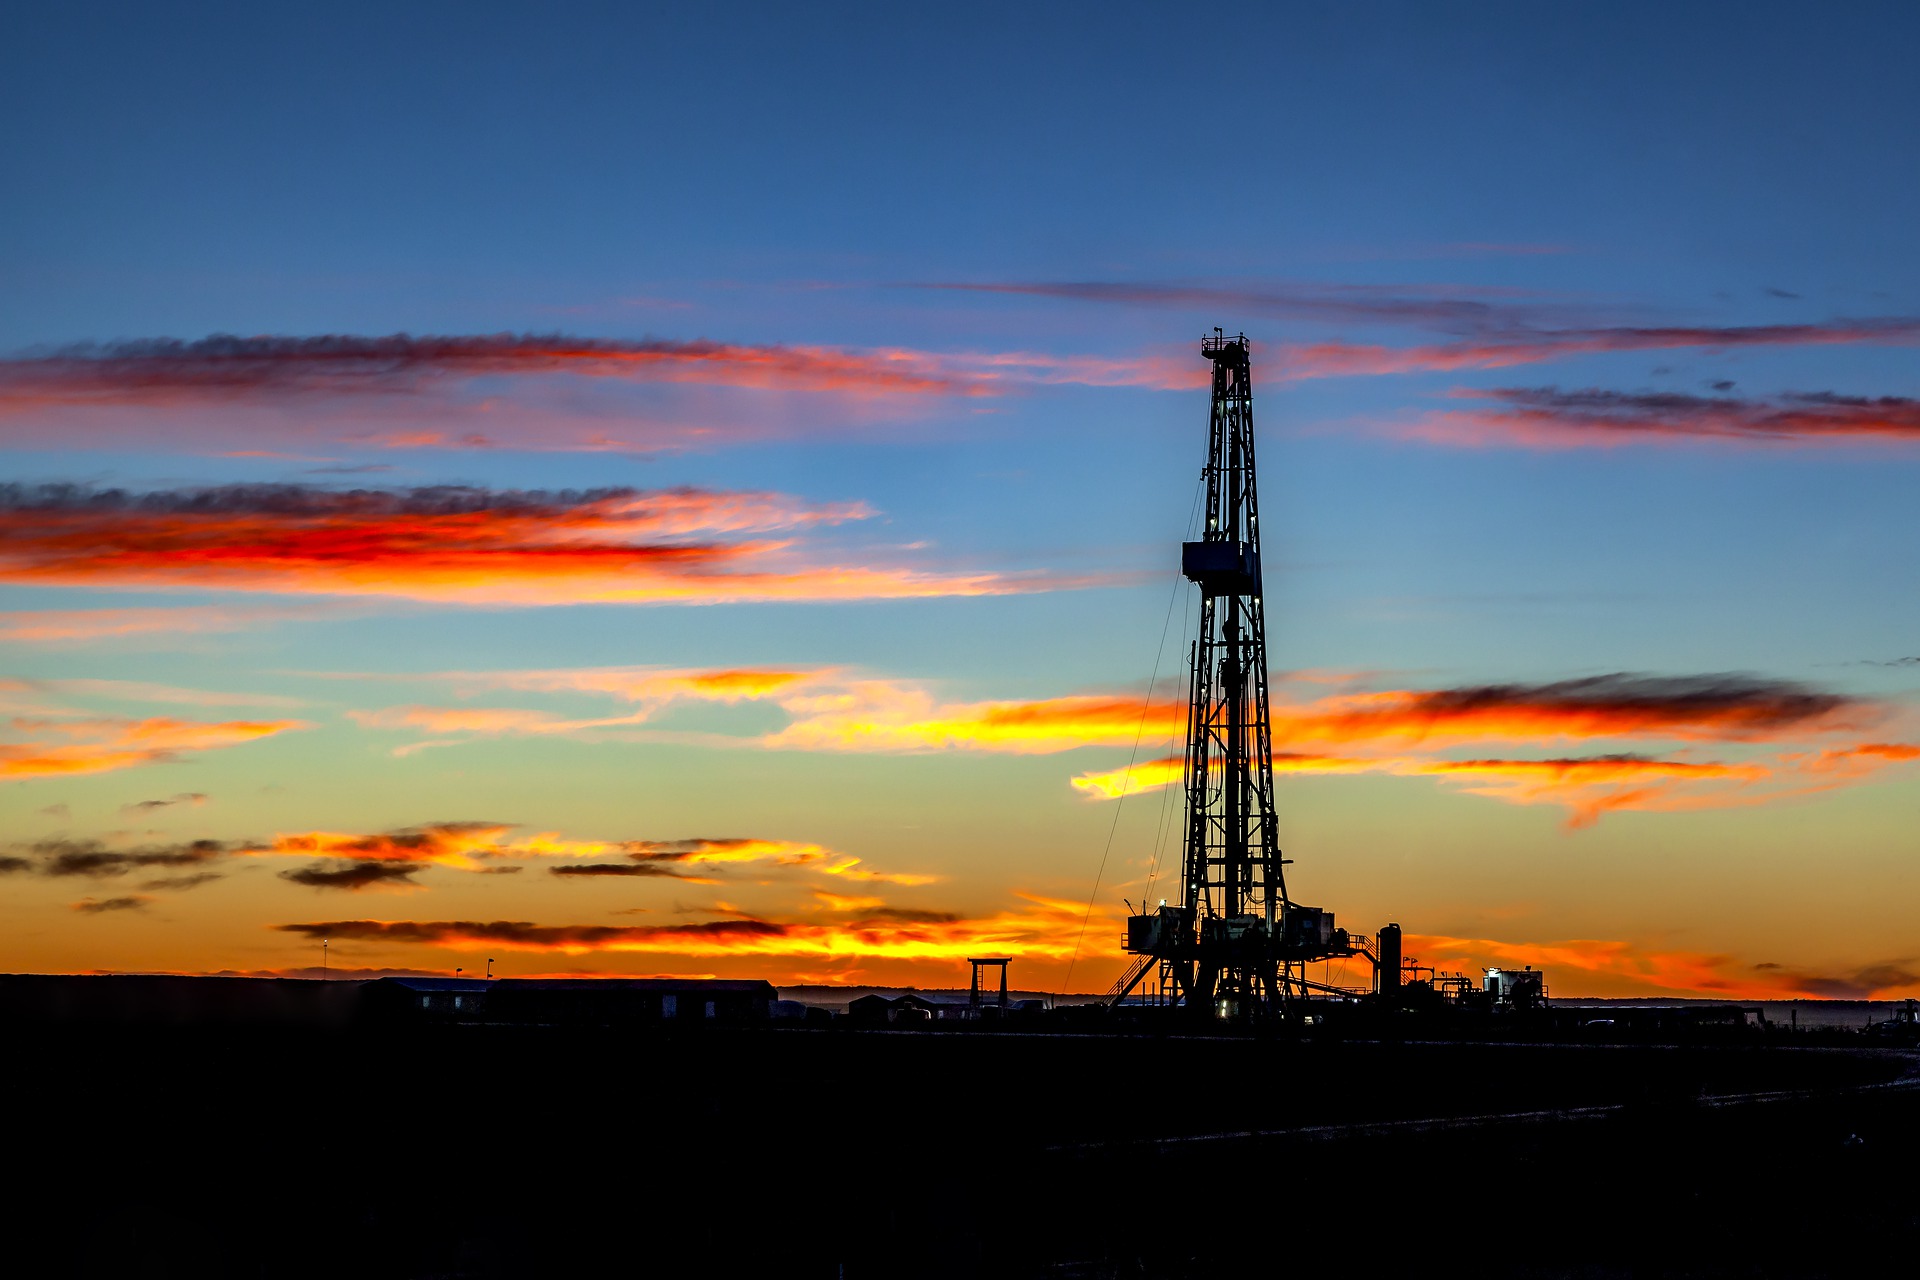 Gas production takeoff: an outlook for the Eagle Ford shale